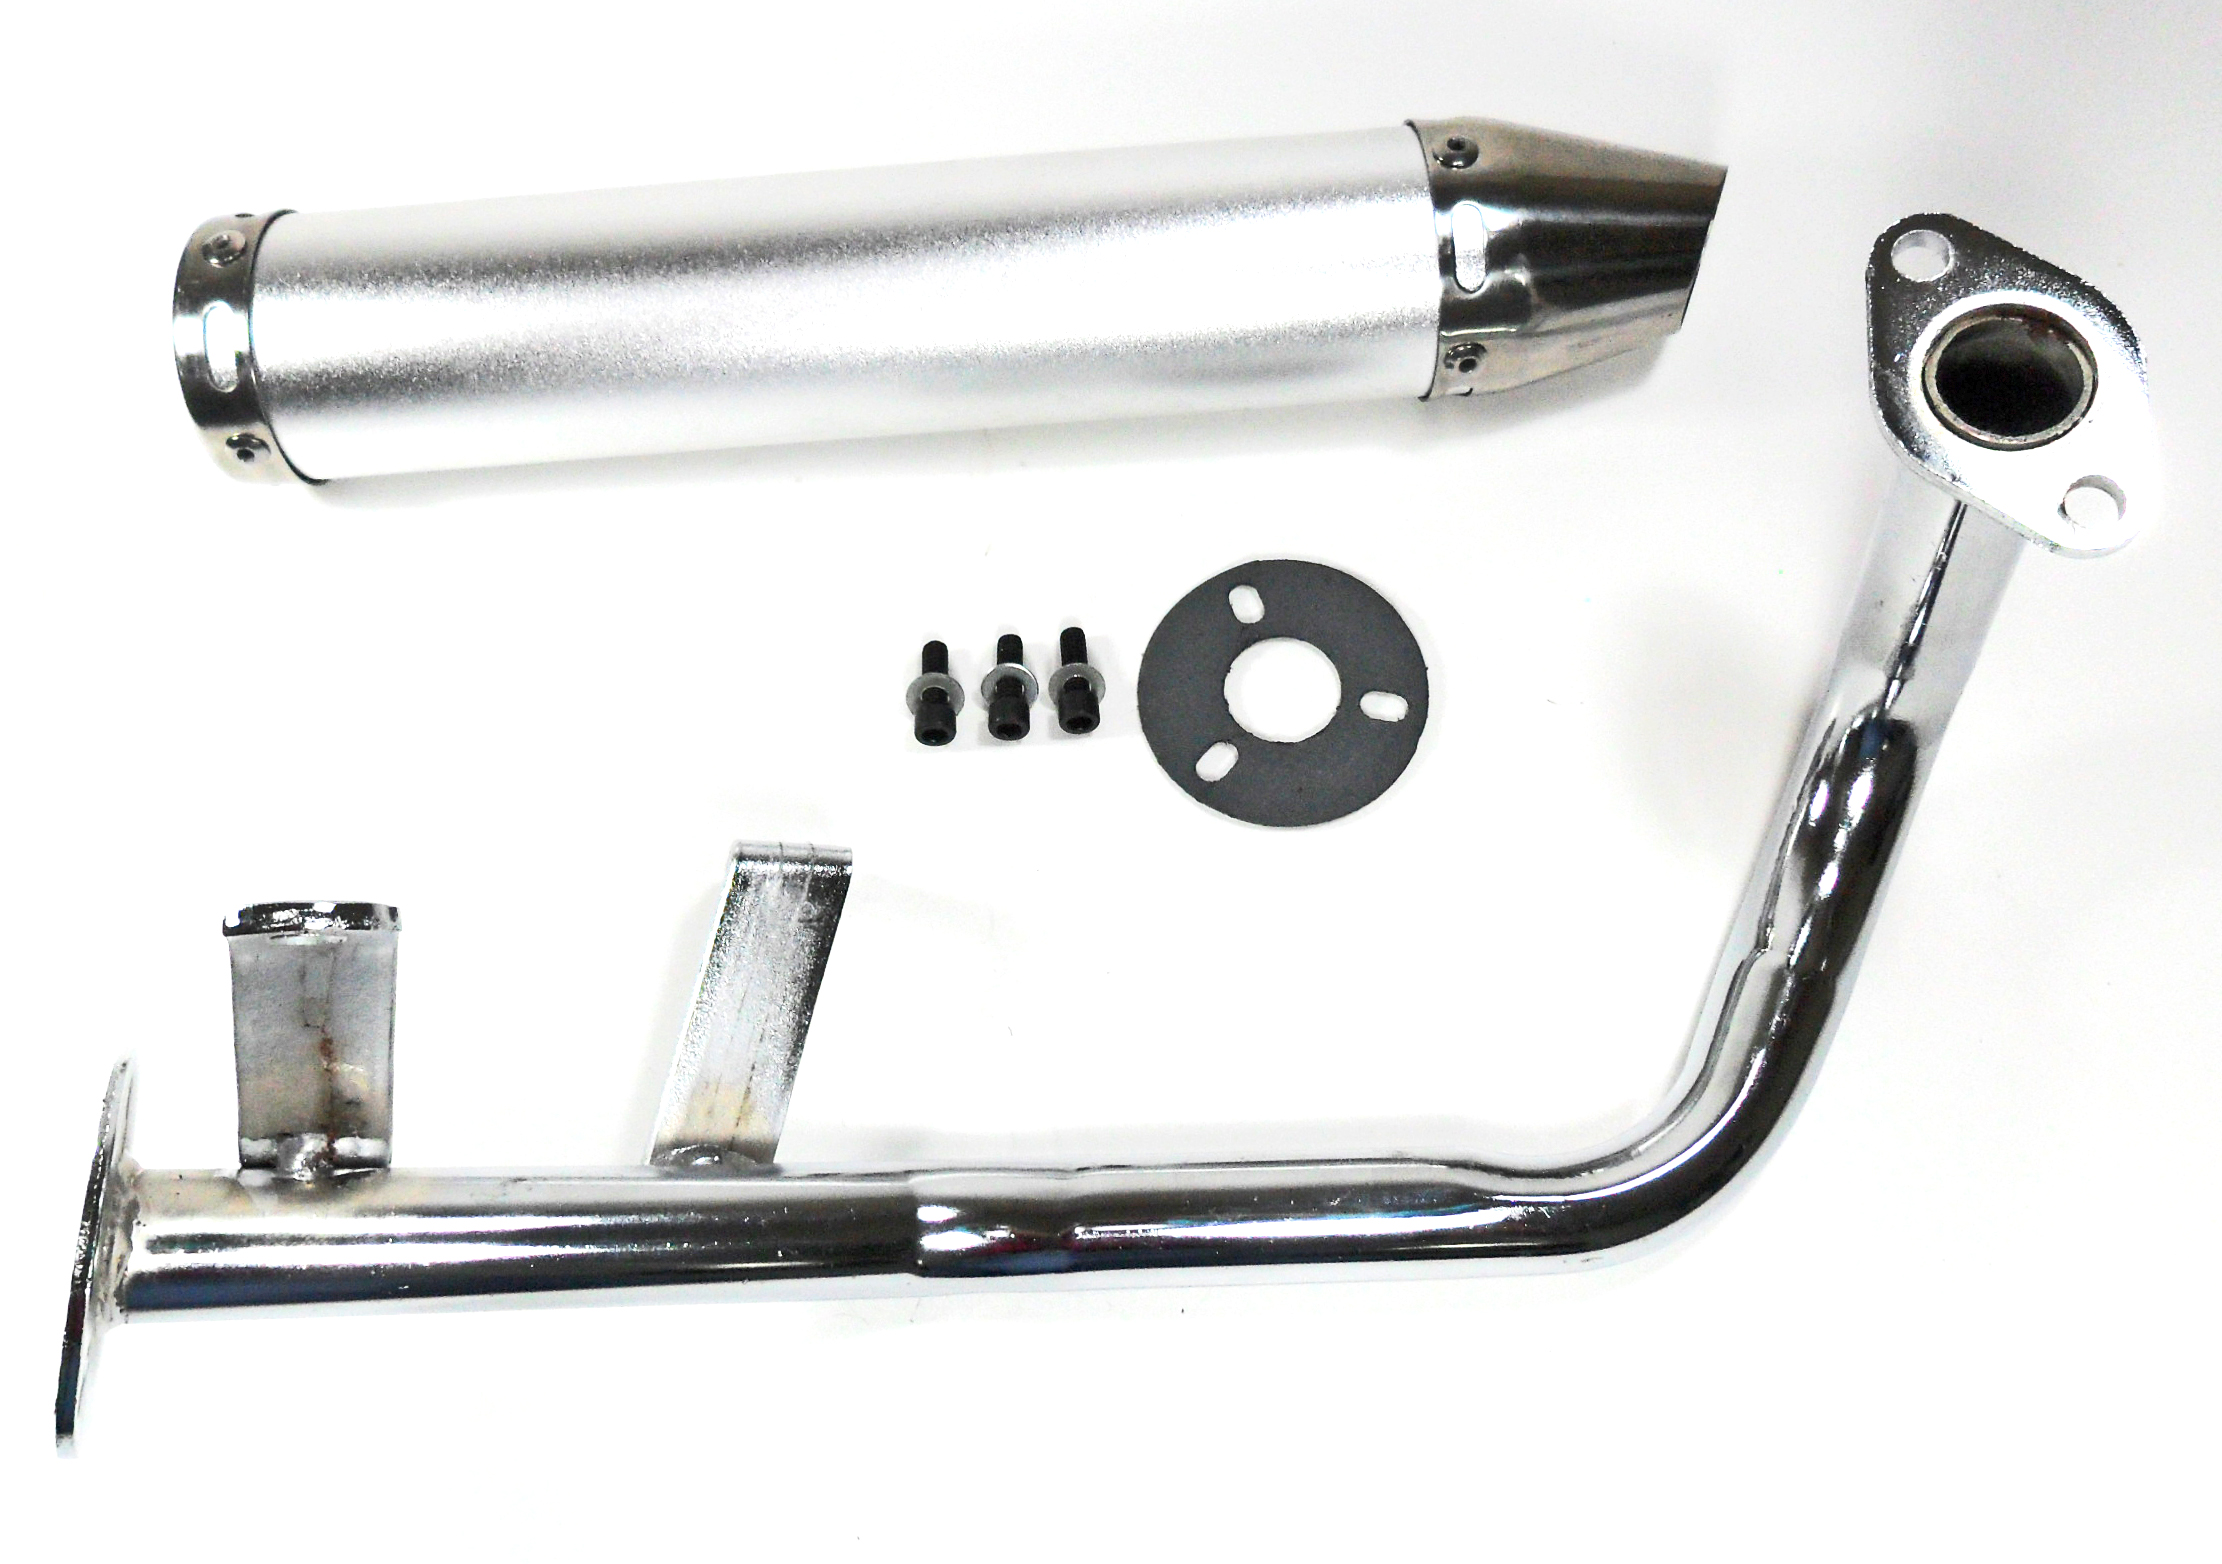 HIGH PERFORMANCE CHROME Exhaust Pipe Fits Most GY6-50 QMB139 49cc Chinese Scooter Motors Canister L=280mm D=60mm